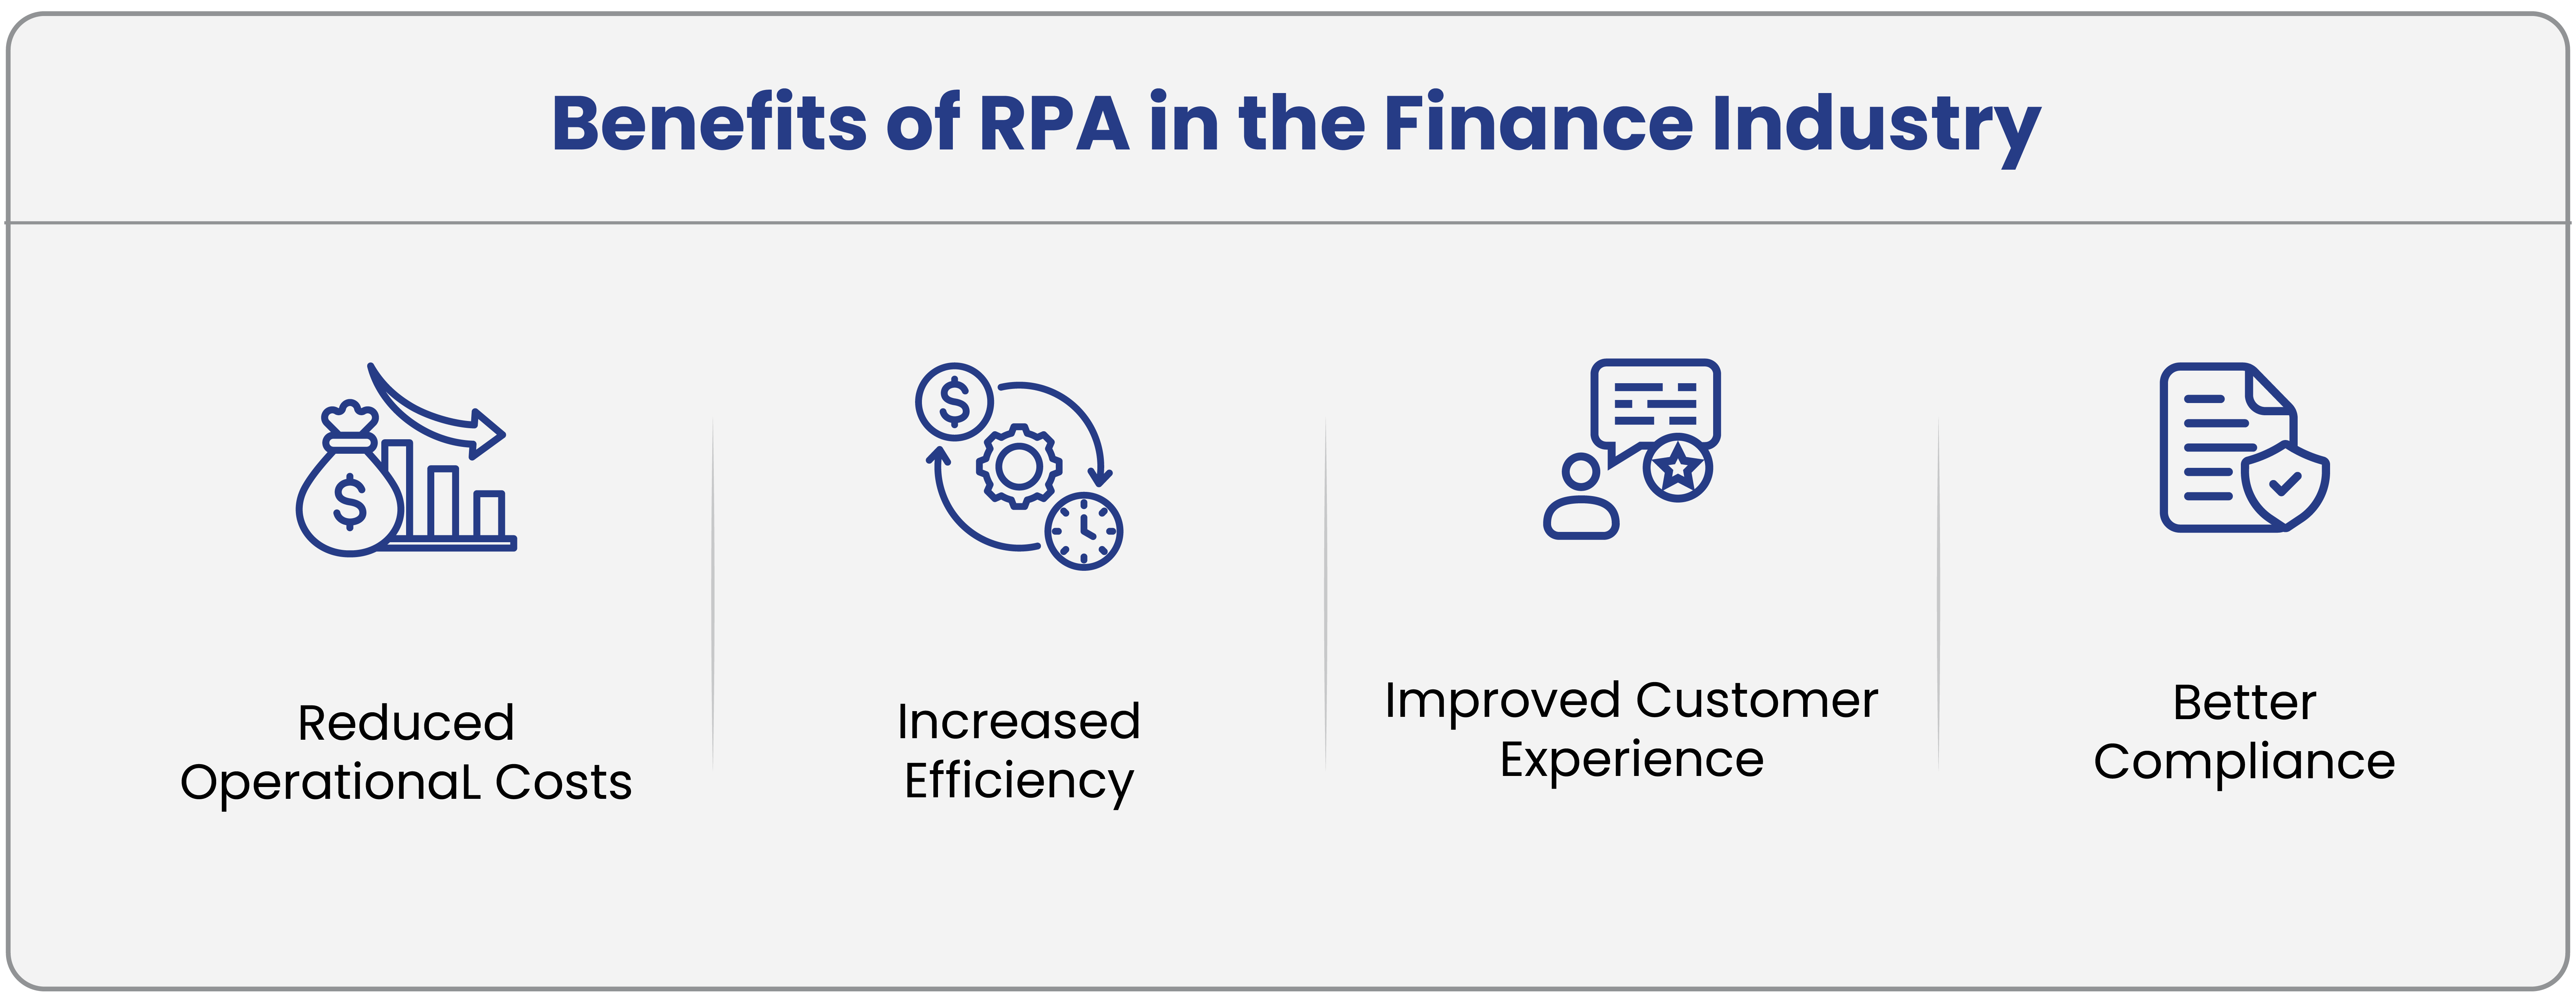 Benefits of RPA in the Finance Industry